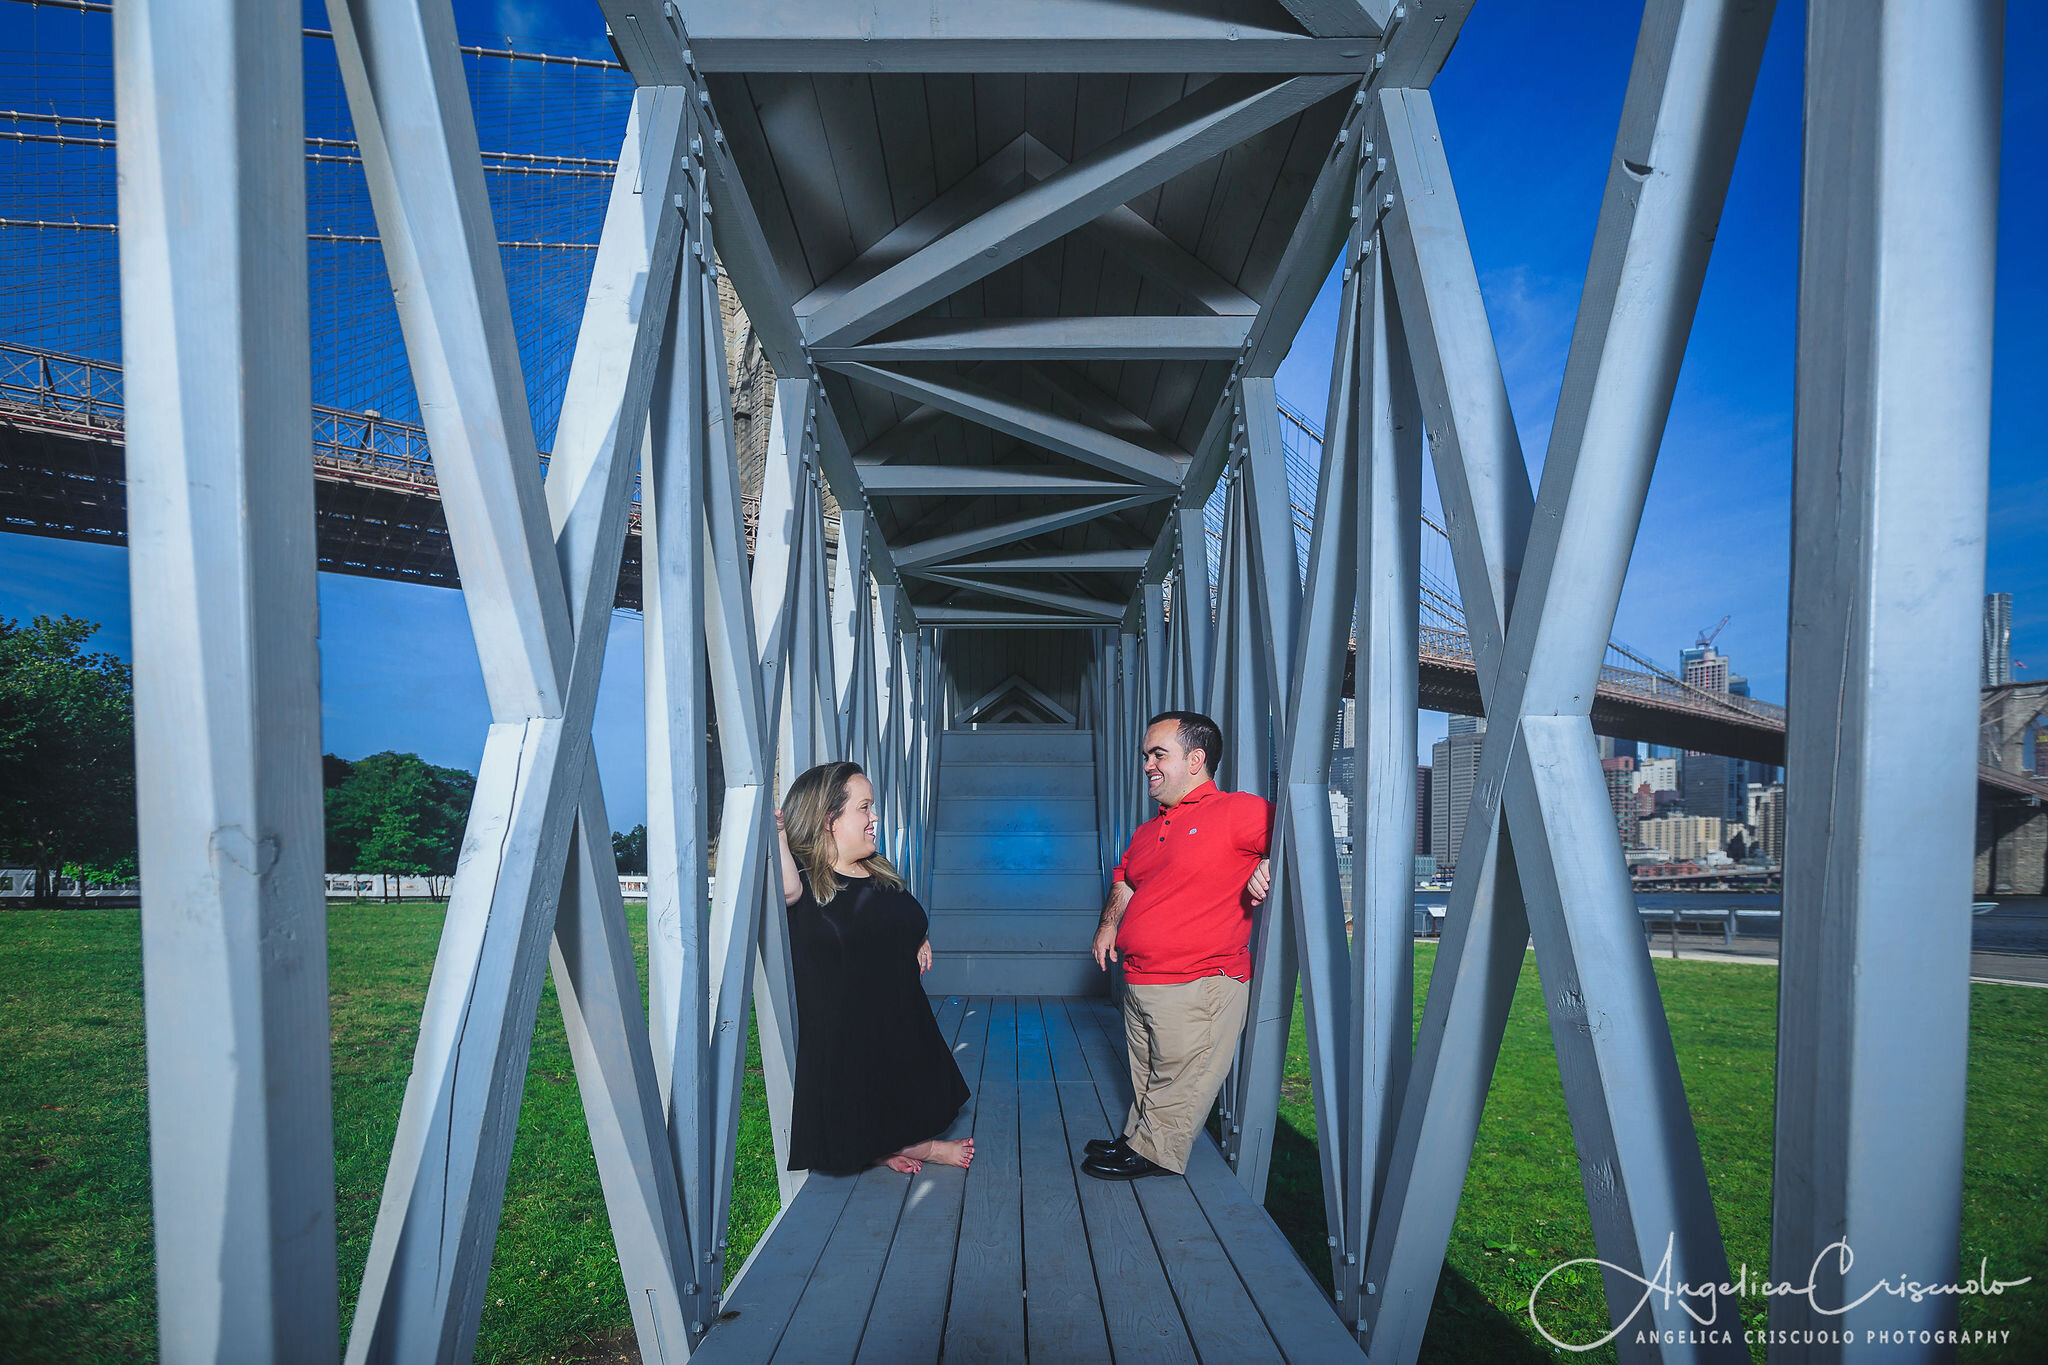  New York DUMBO Brooklyn Engagement Wedding Photos ©2019 Angelica Criscuolo Photography | All Rights Reserved | www.AngelicaCriscuoloPhotography.com | www.facebook.com/AngelicaCriscuoloPhotography 